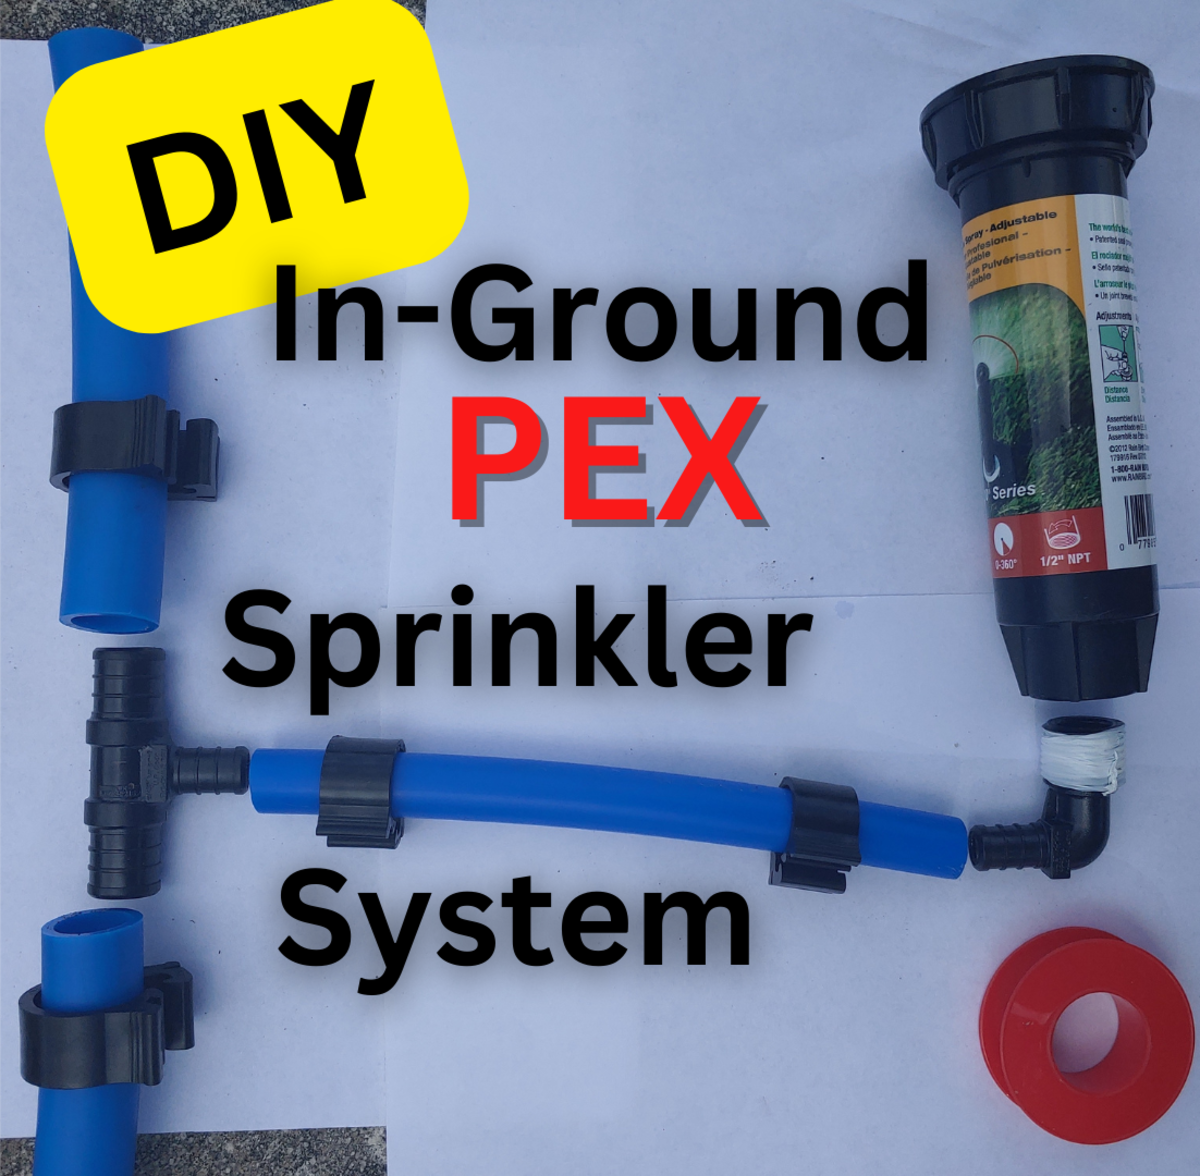 How to Install a DIY PEX Pop-Up Lawn and Garden Sprinkler System